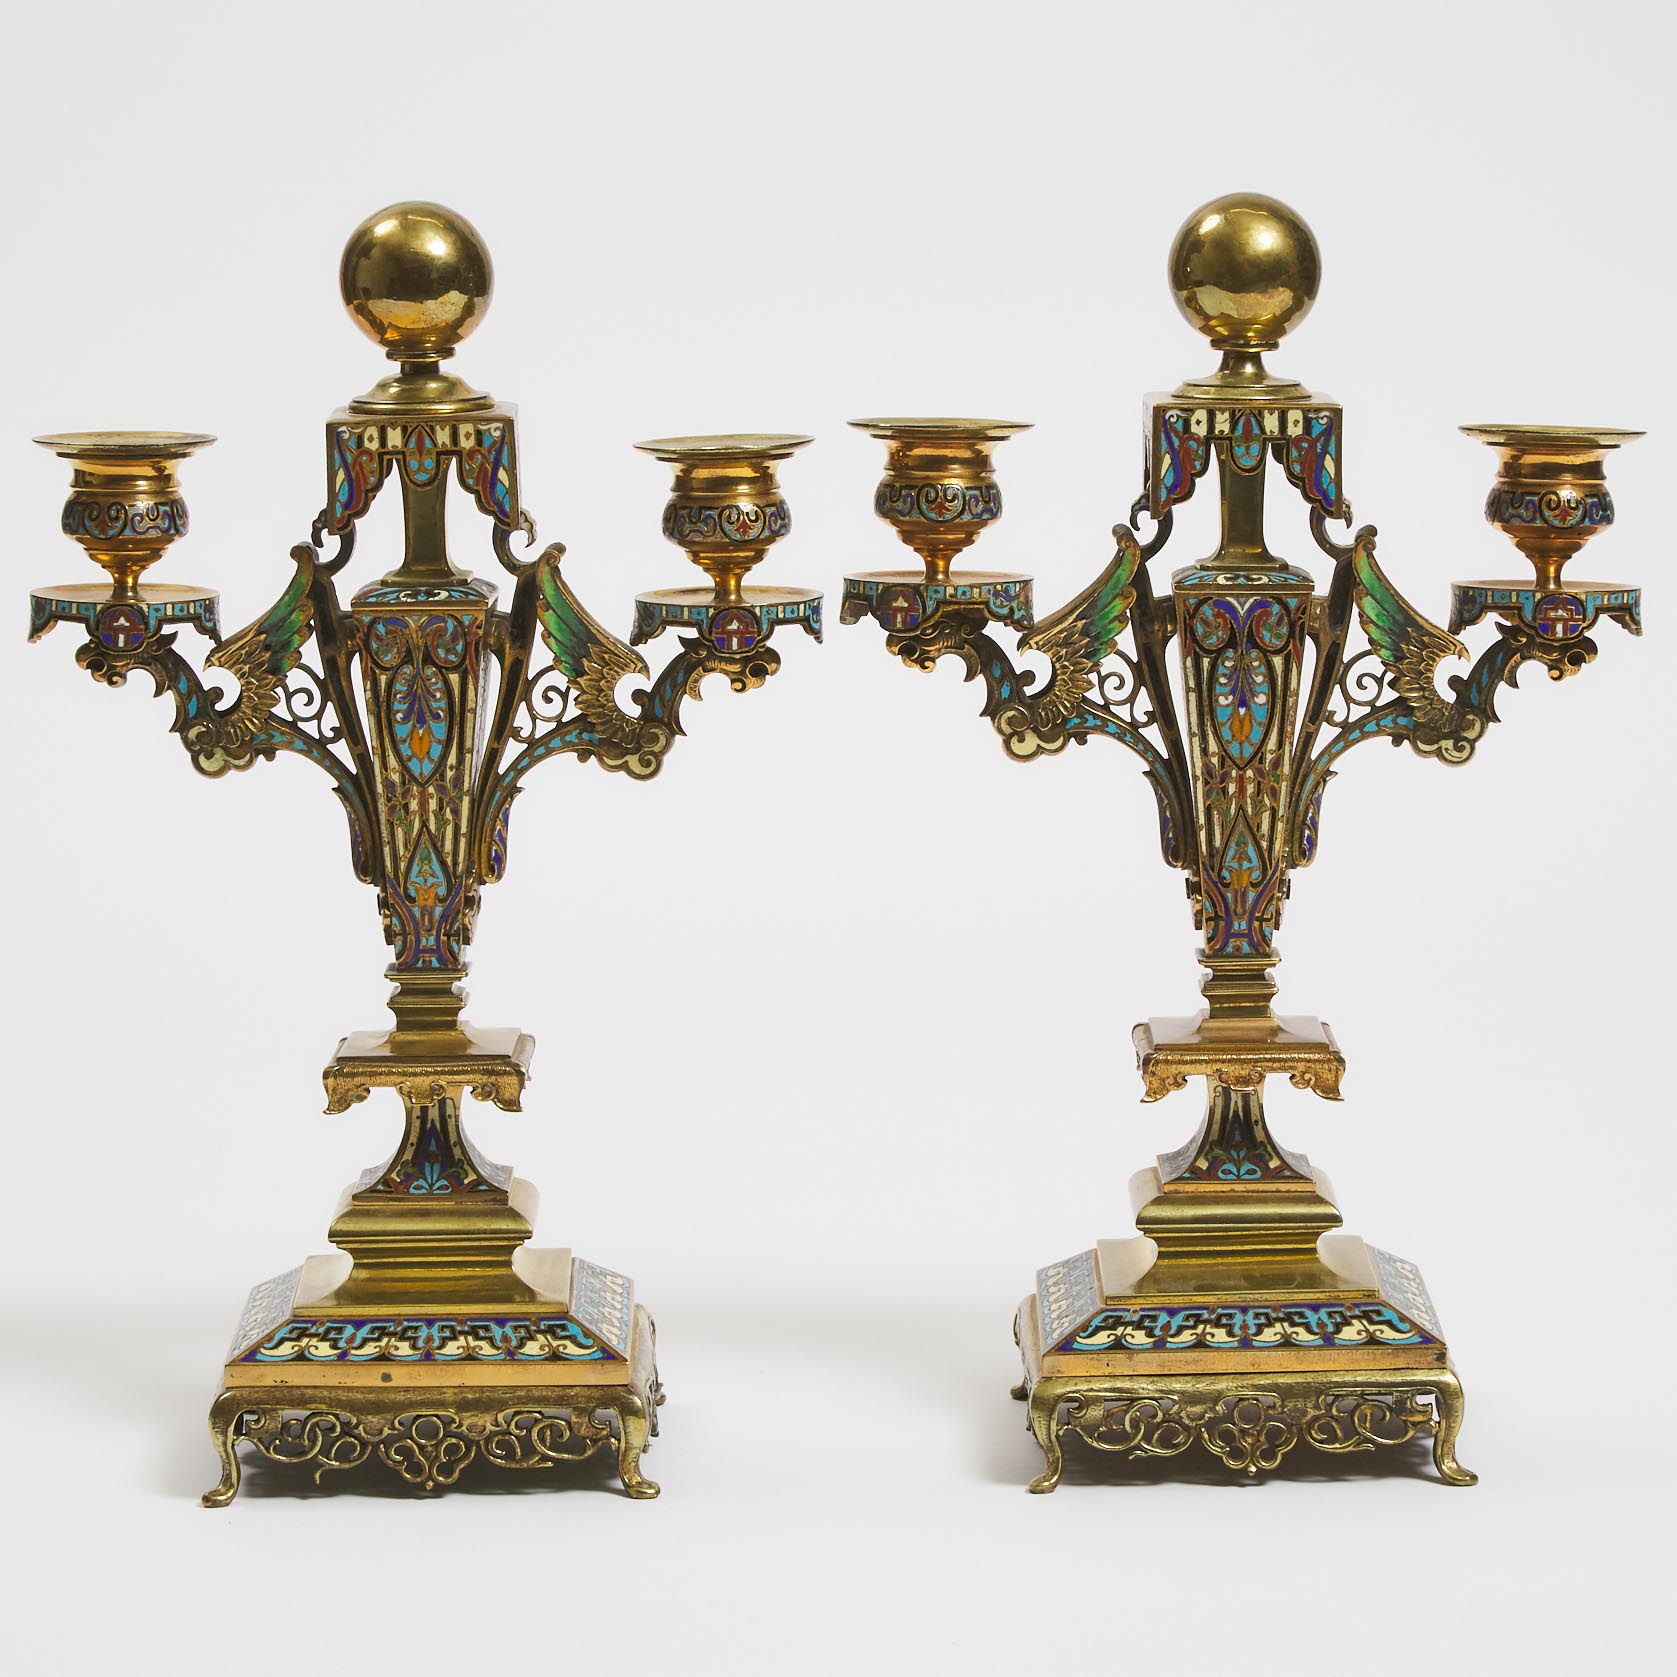 Pair of French Aesthetic Movement Champlevé Enamelled Gilt Bronze Two-Light Candelabra, c.1870